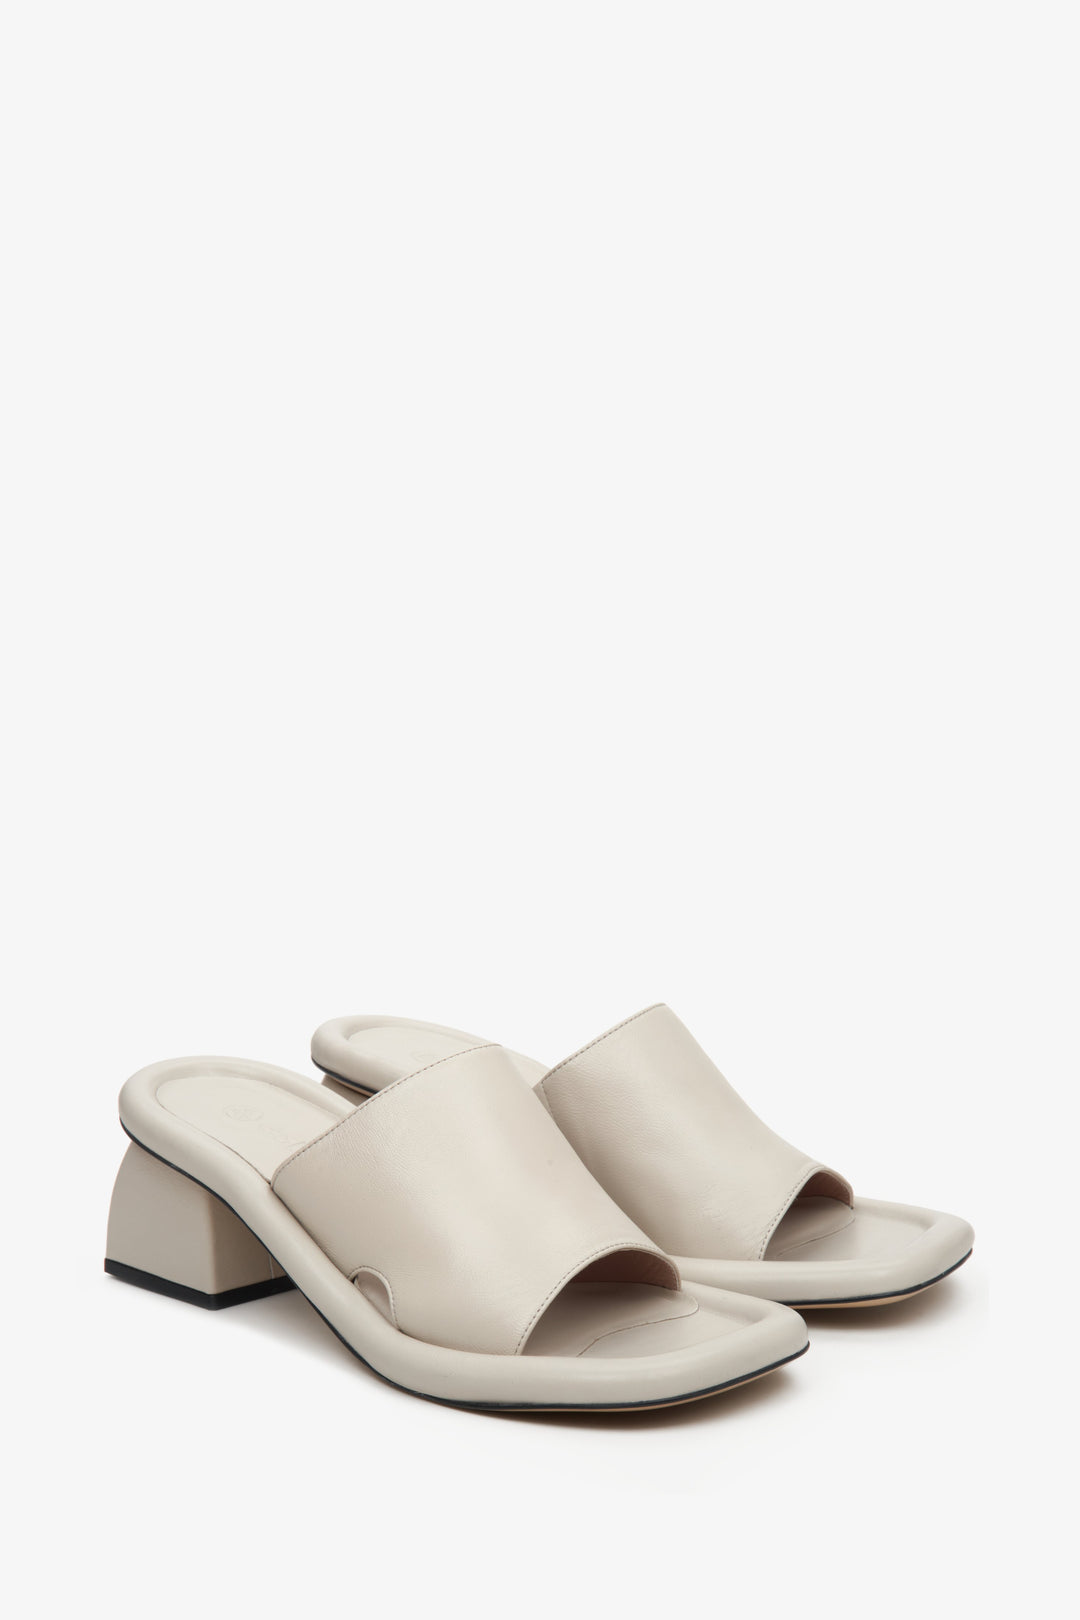 Estro beige women's mules made of Italian natural leather.